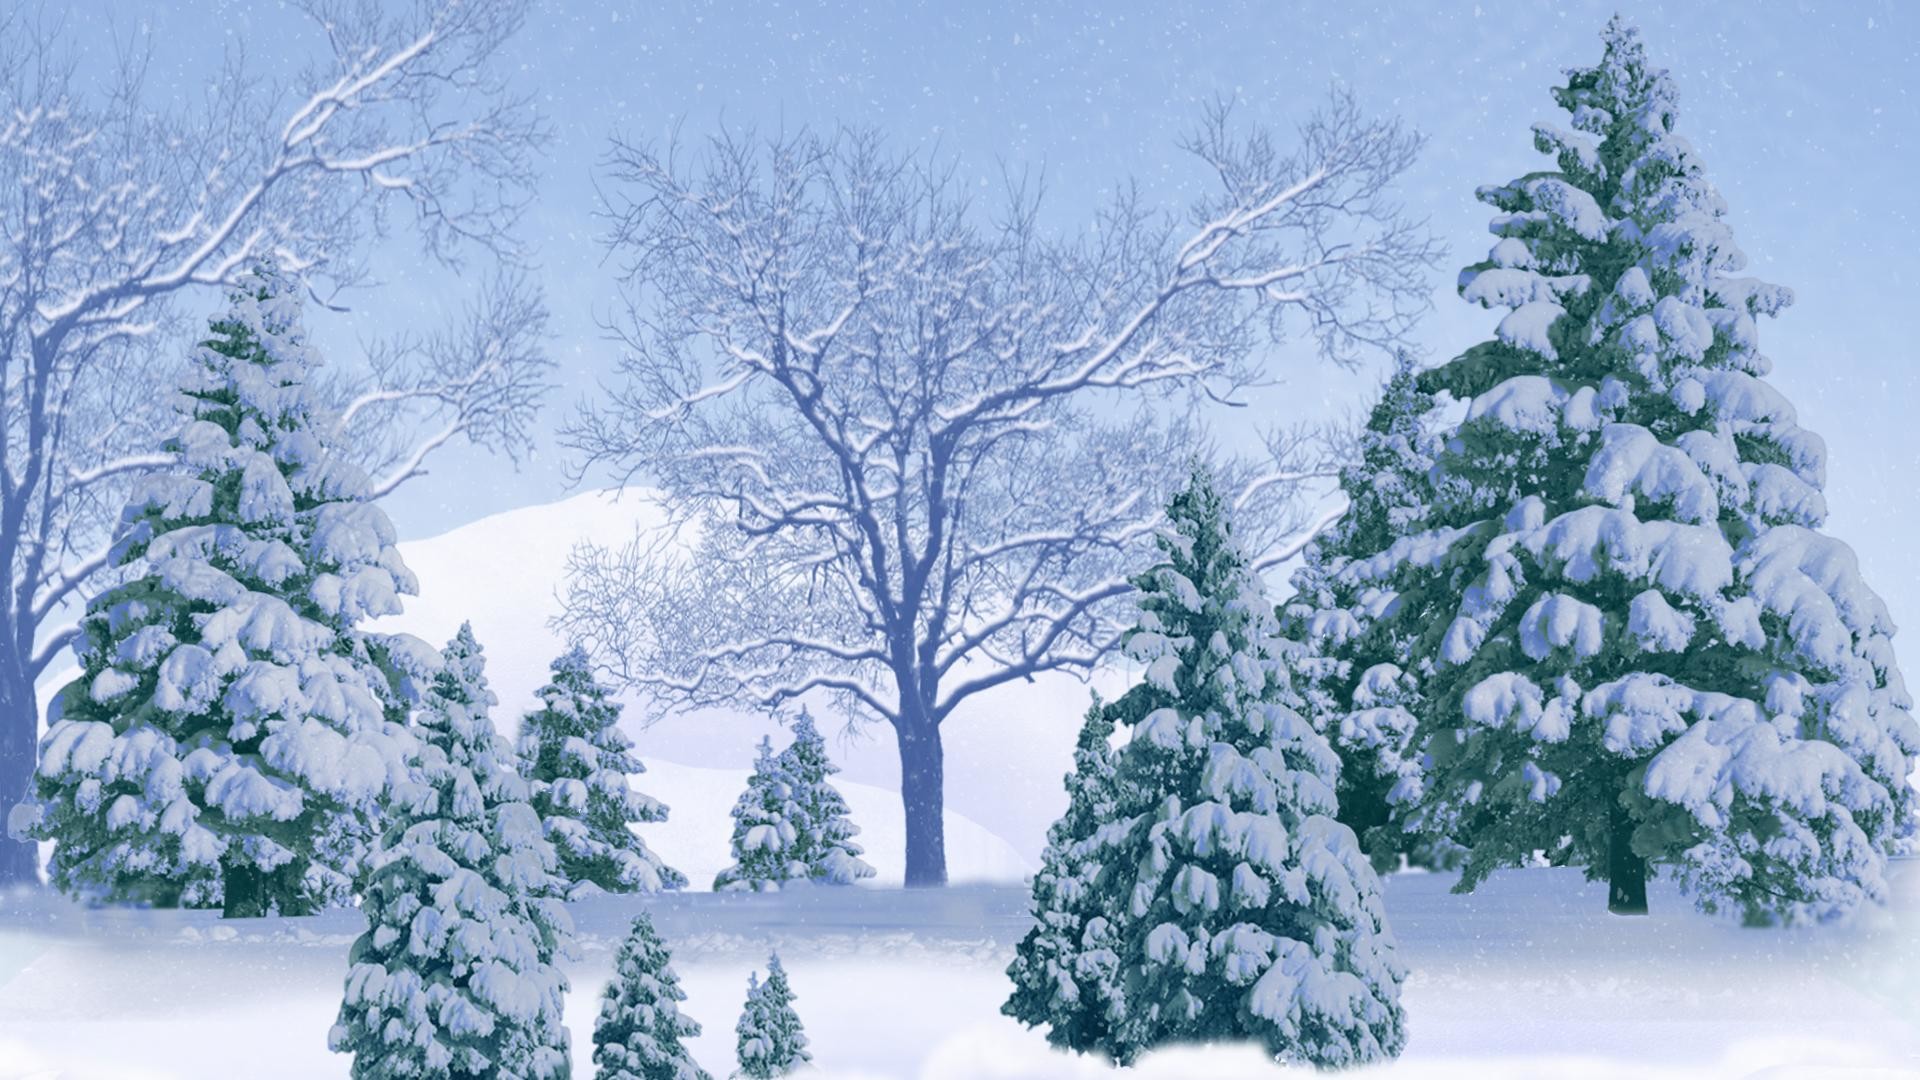 1920x1080 ... background images, seasons, snowfall, view, flakes, snow, blizzard .